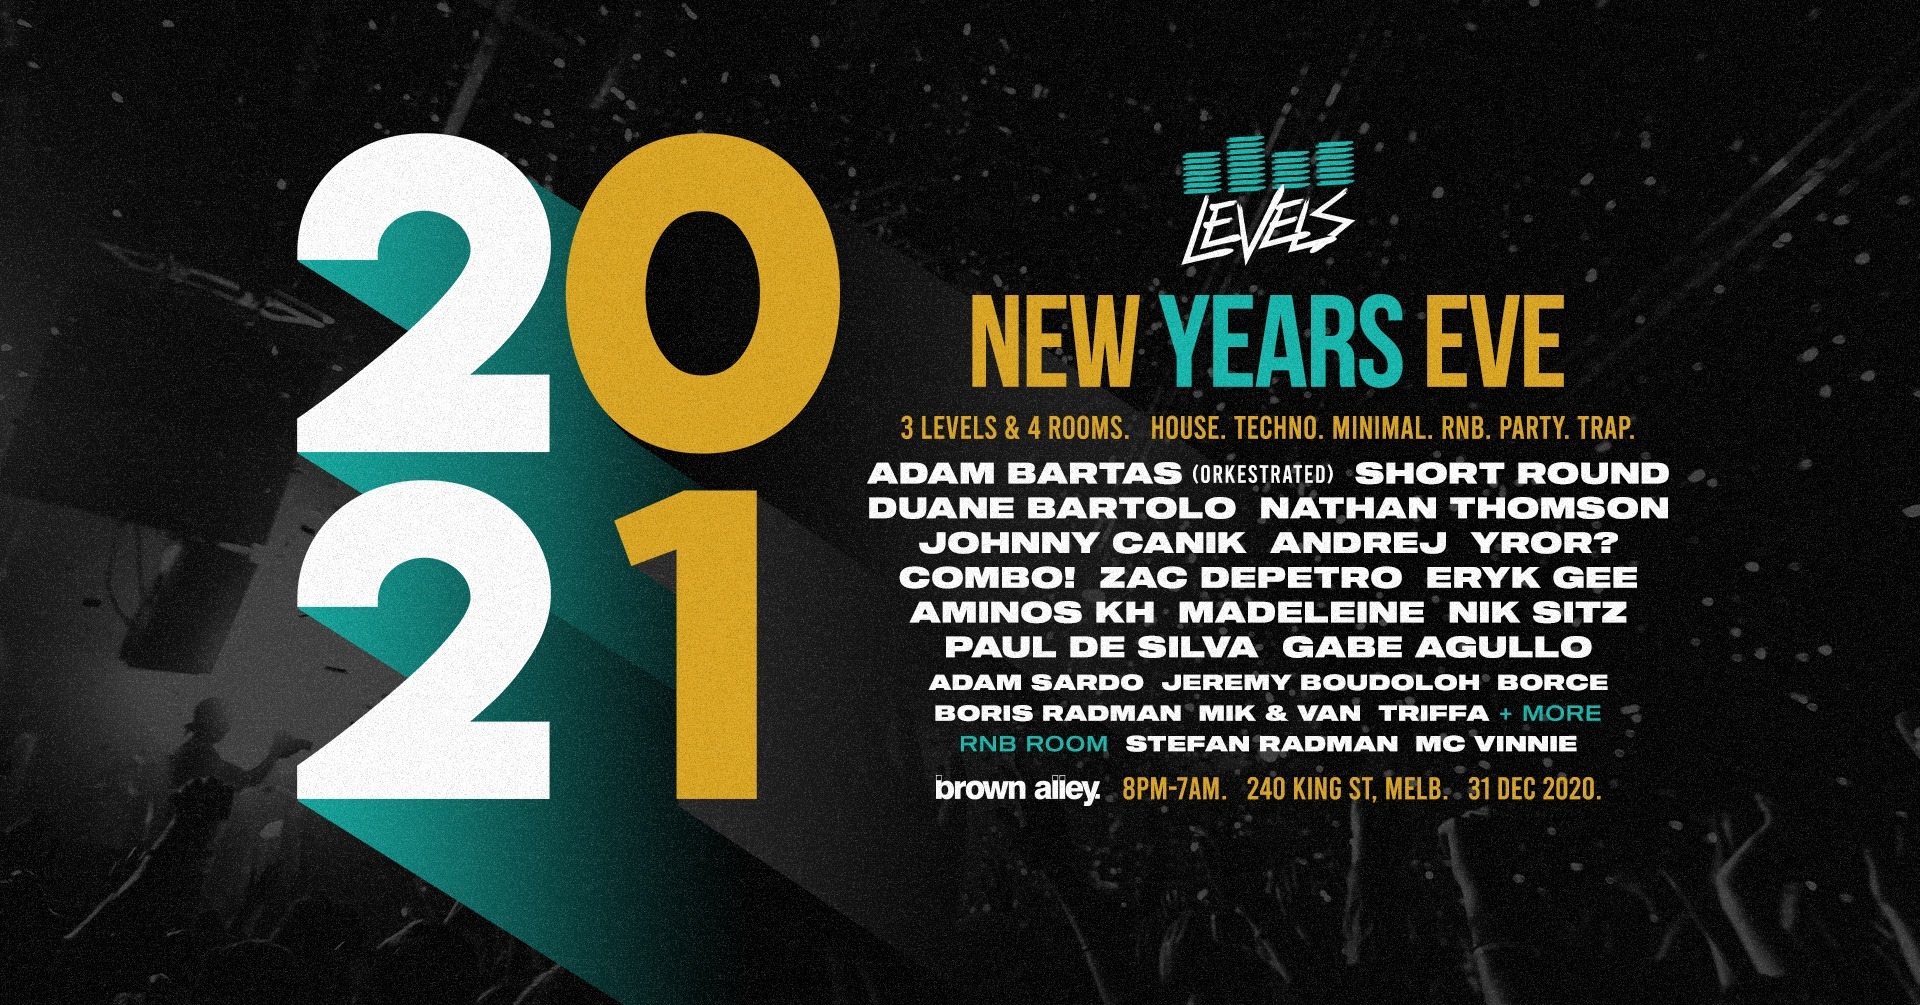 LEVELS - NEW YEARS EVE 2021